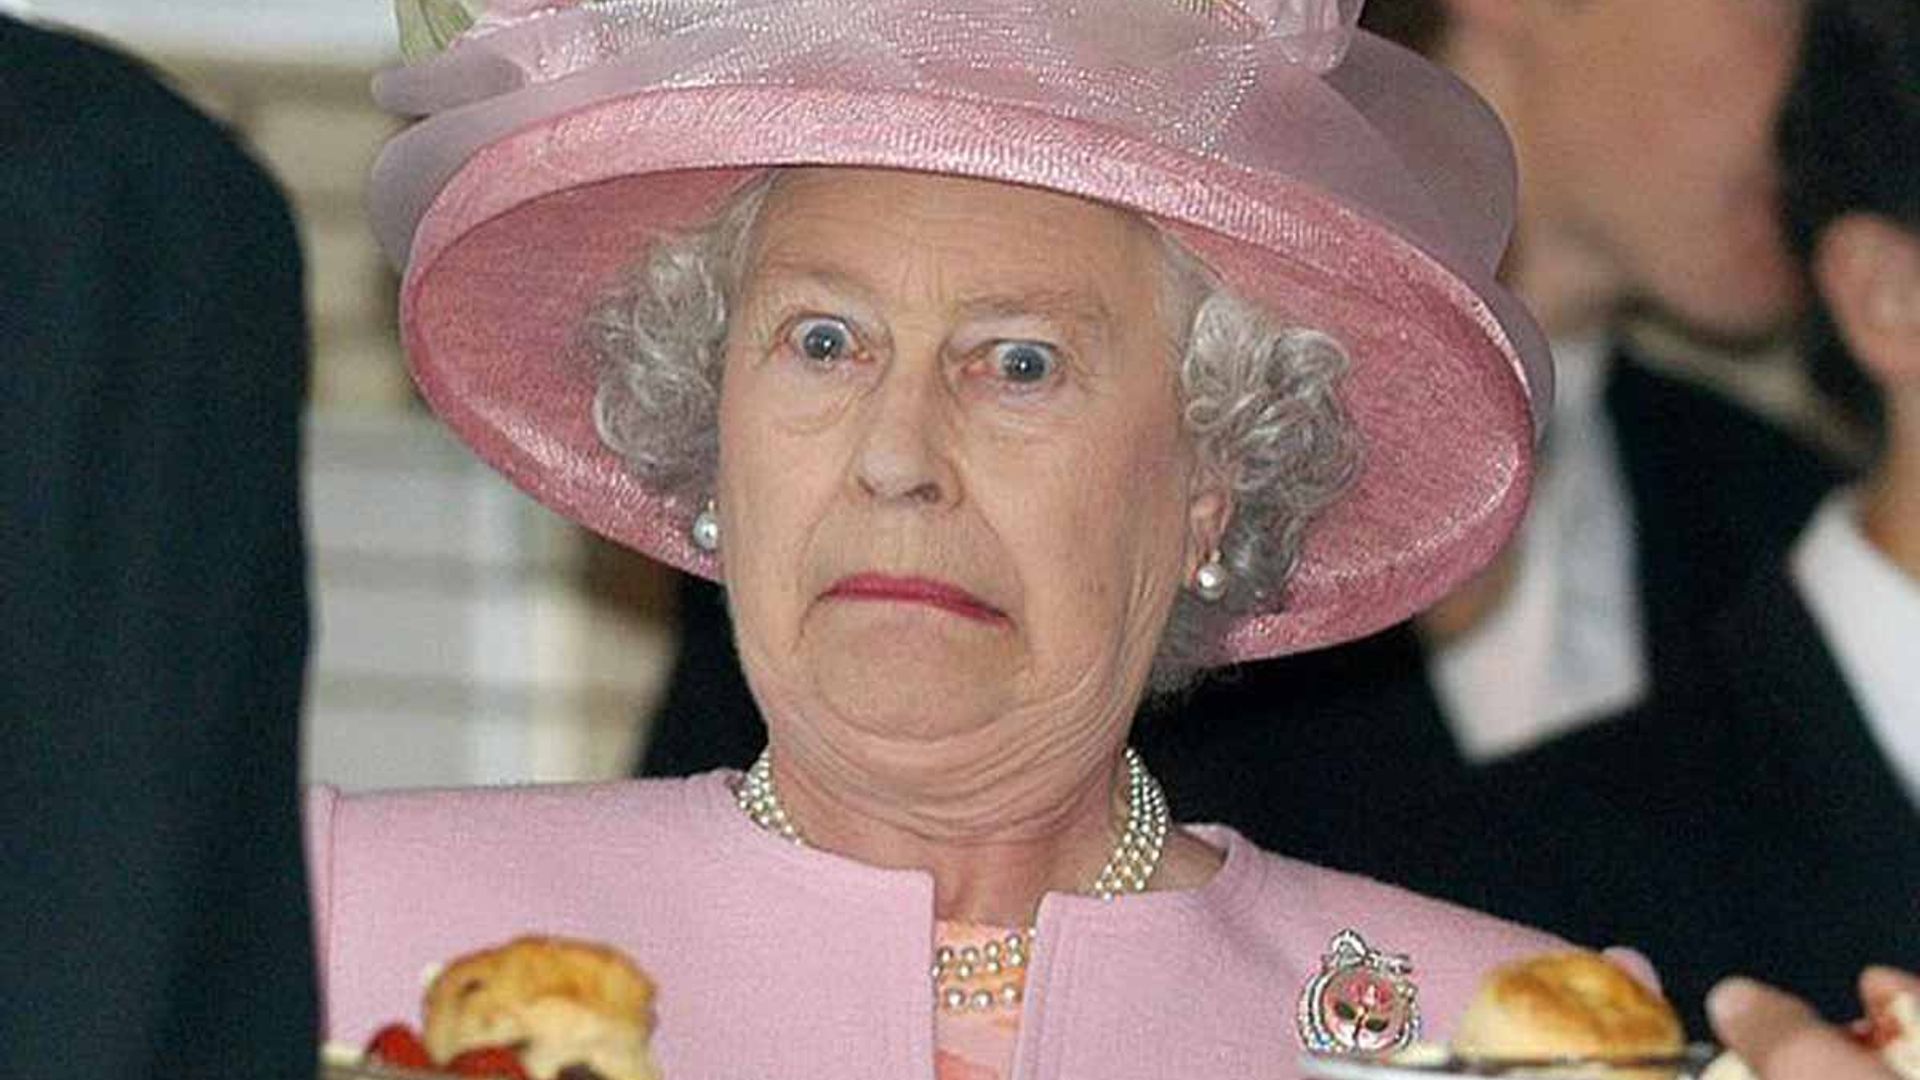 The Queen hates eating this one food – and it's banned from royal menus